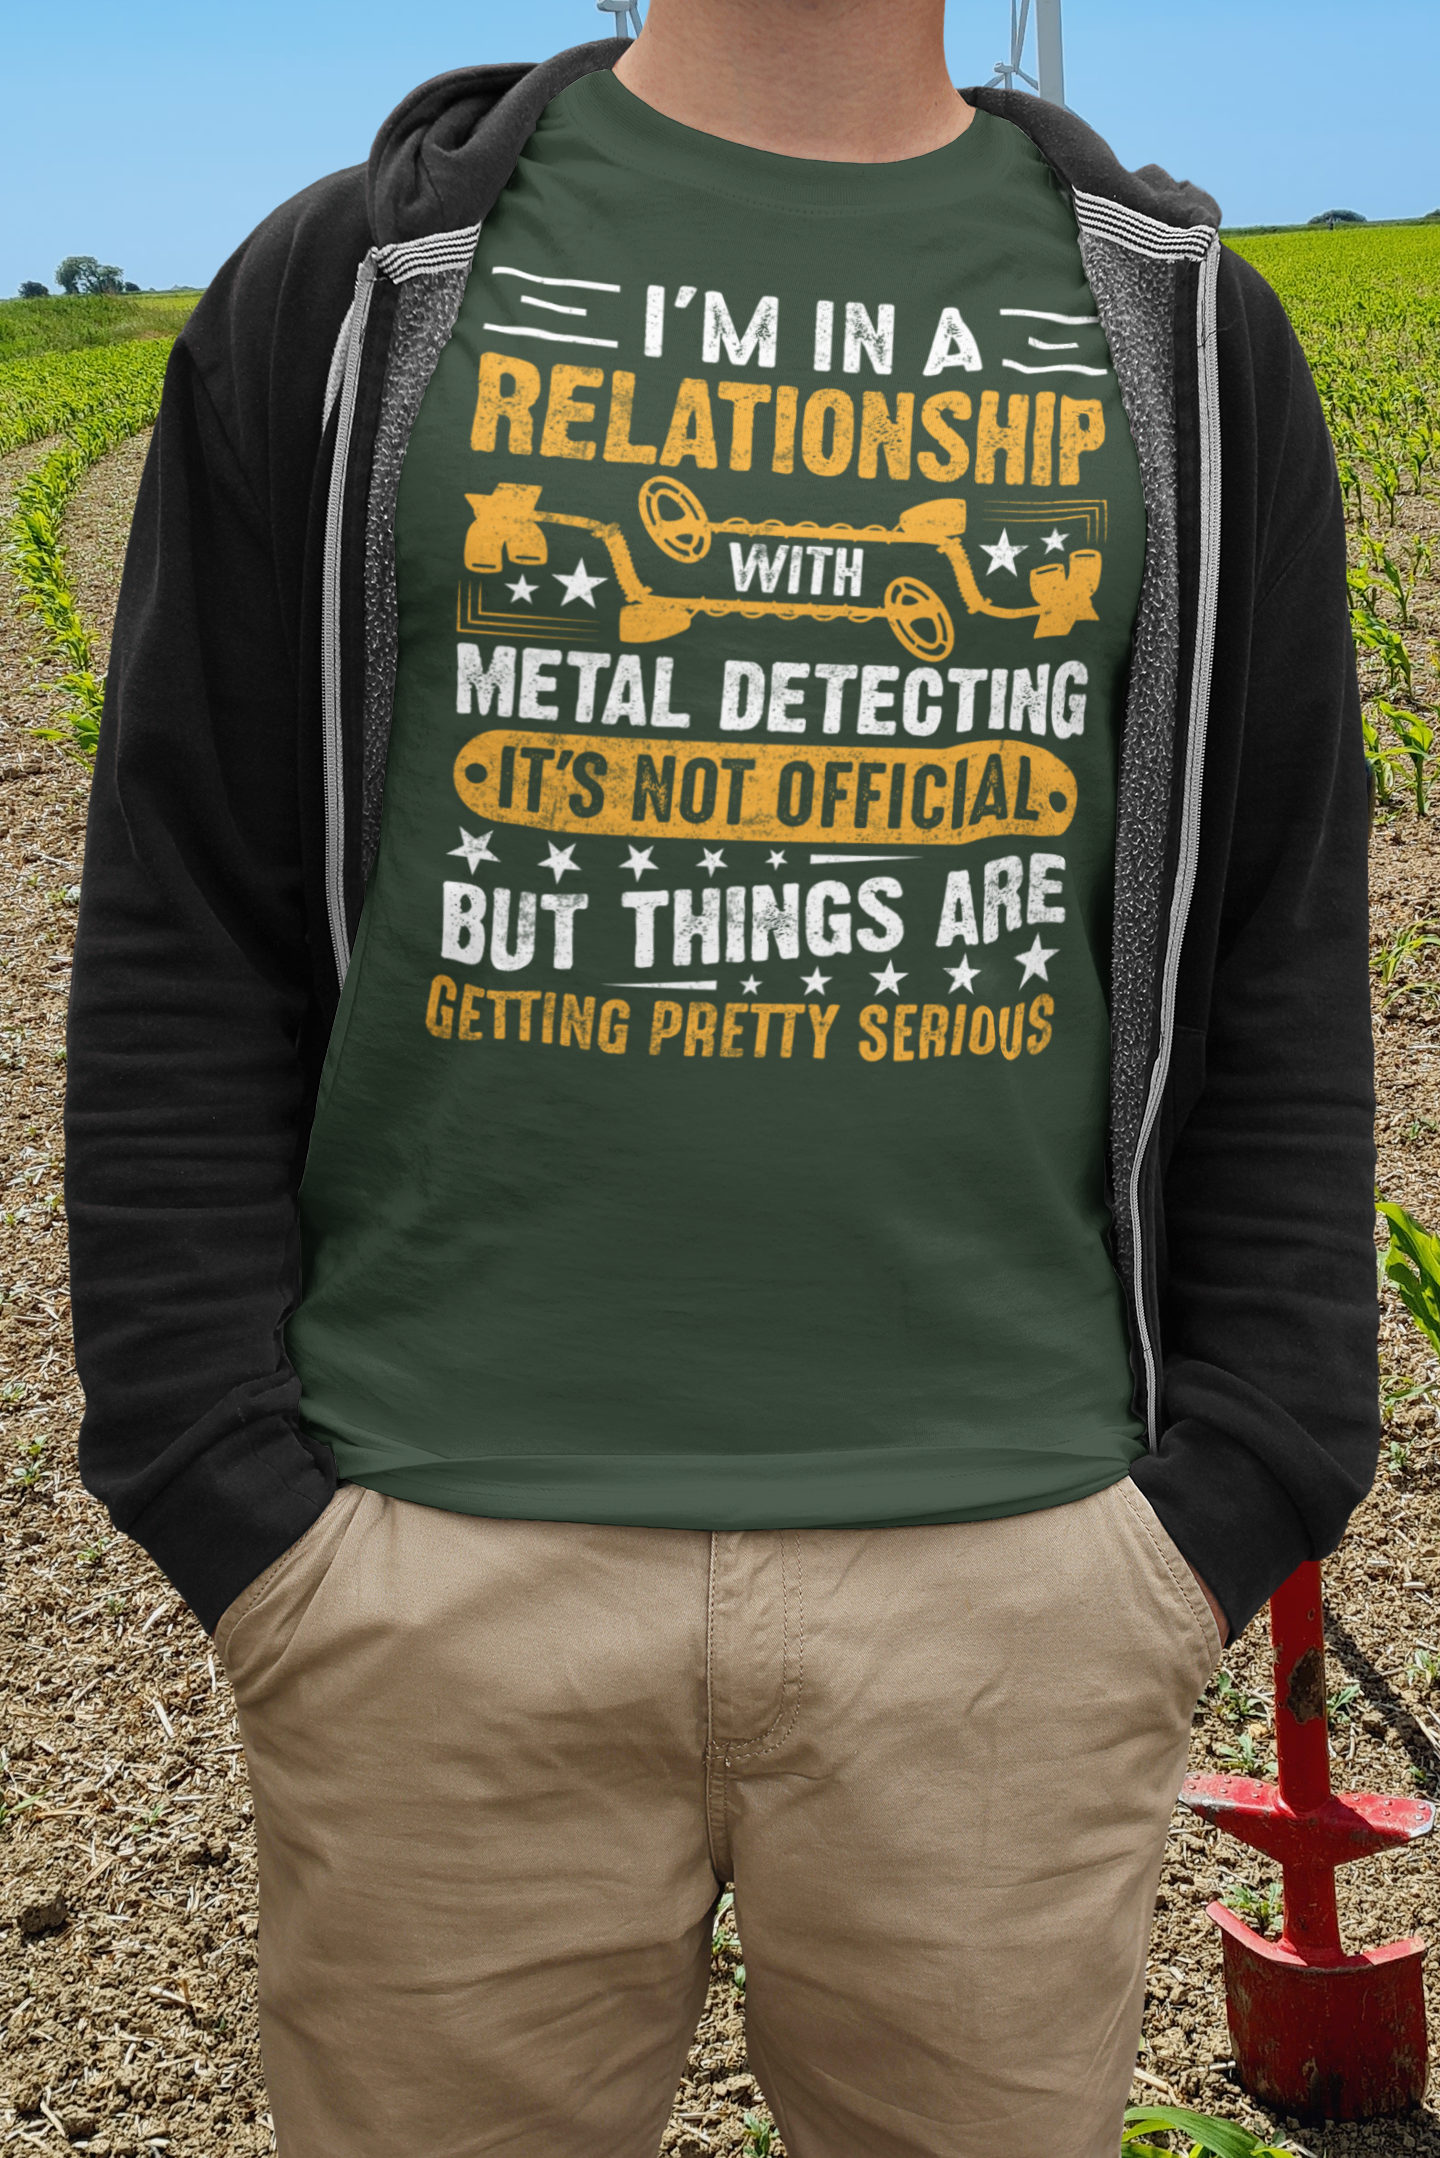 Im in a relationship with metal detecting